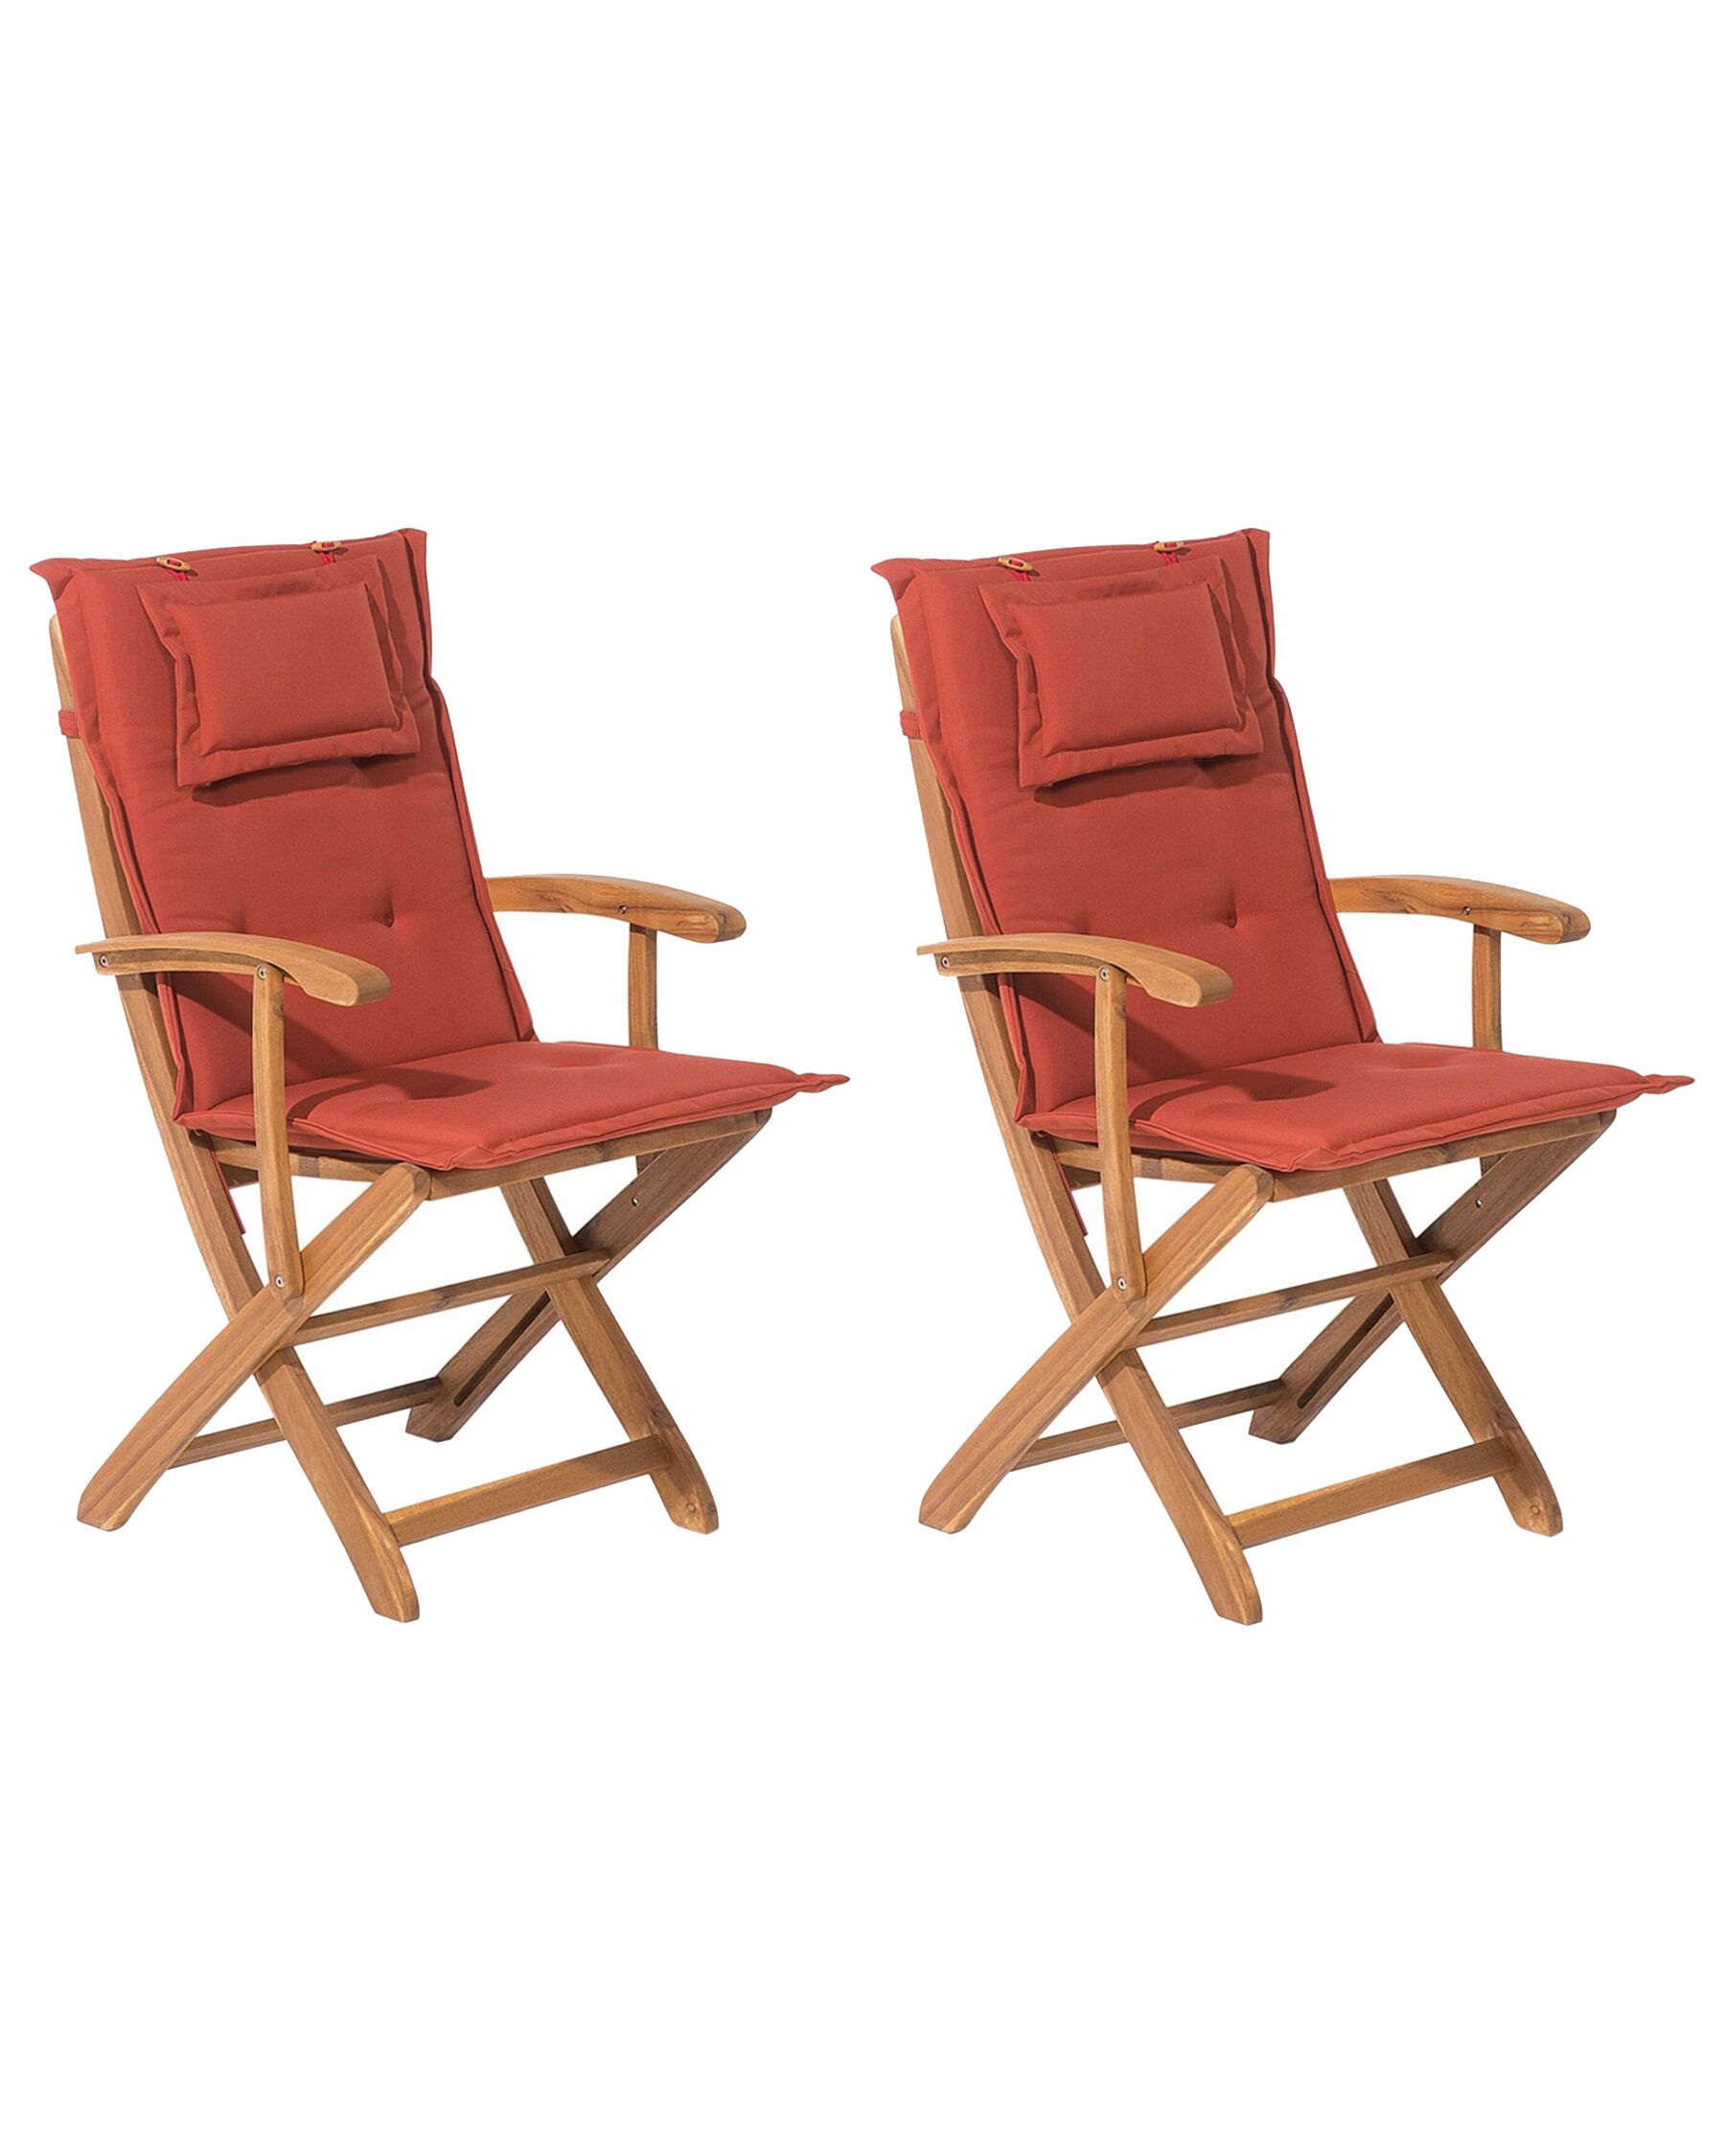 Set of 2 Garden Dining Chairs with Red Cushion MAUI_721921